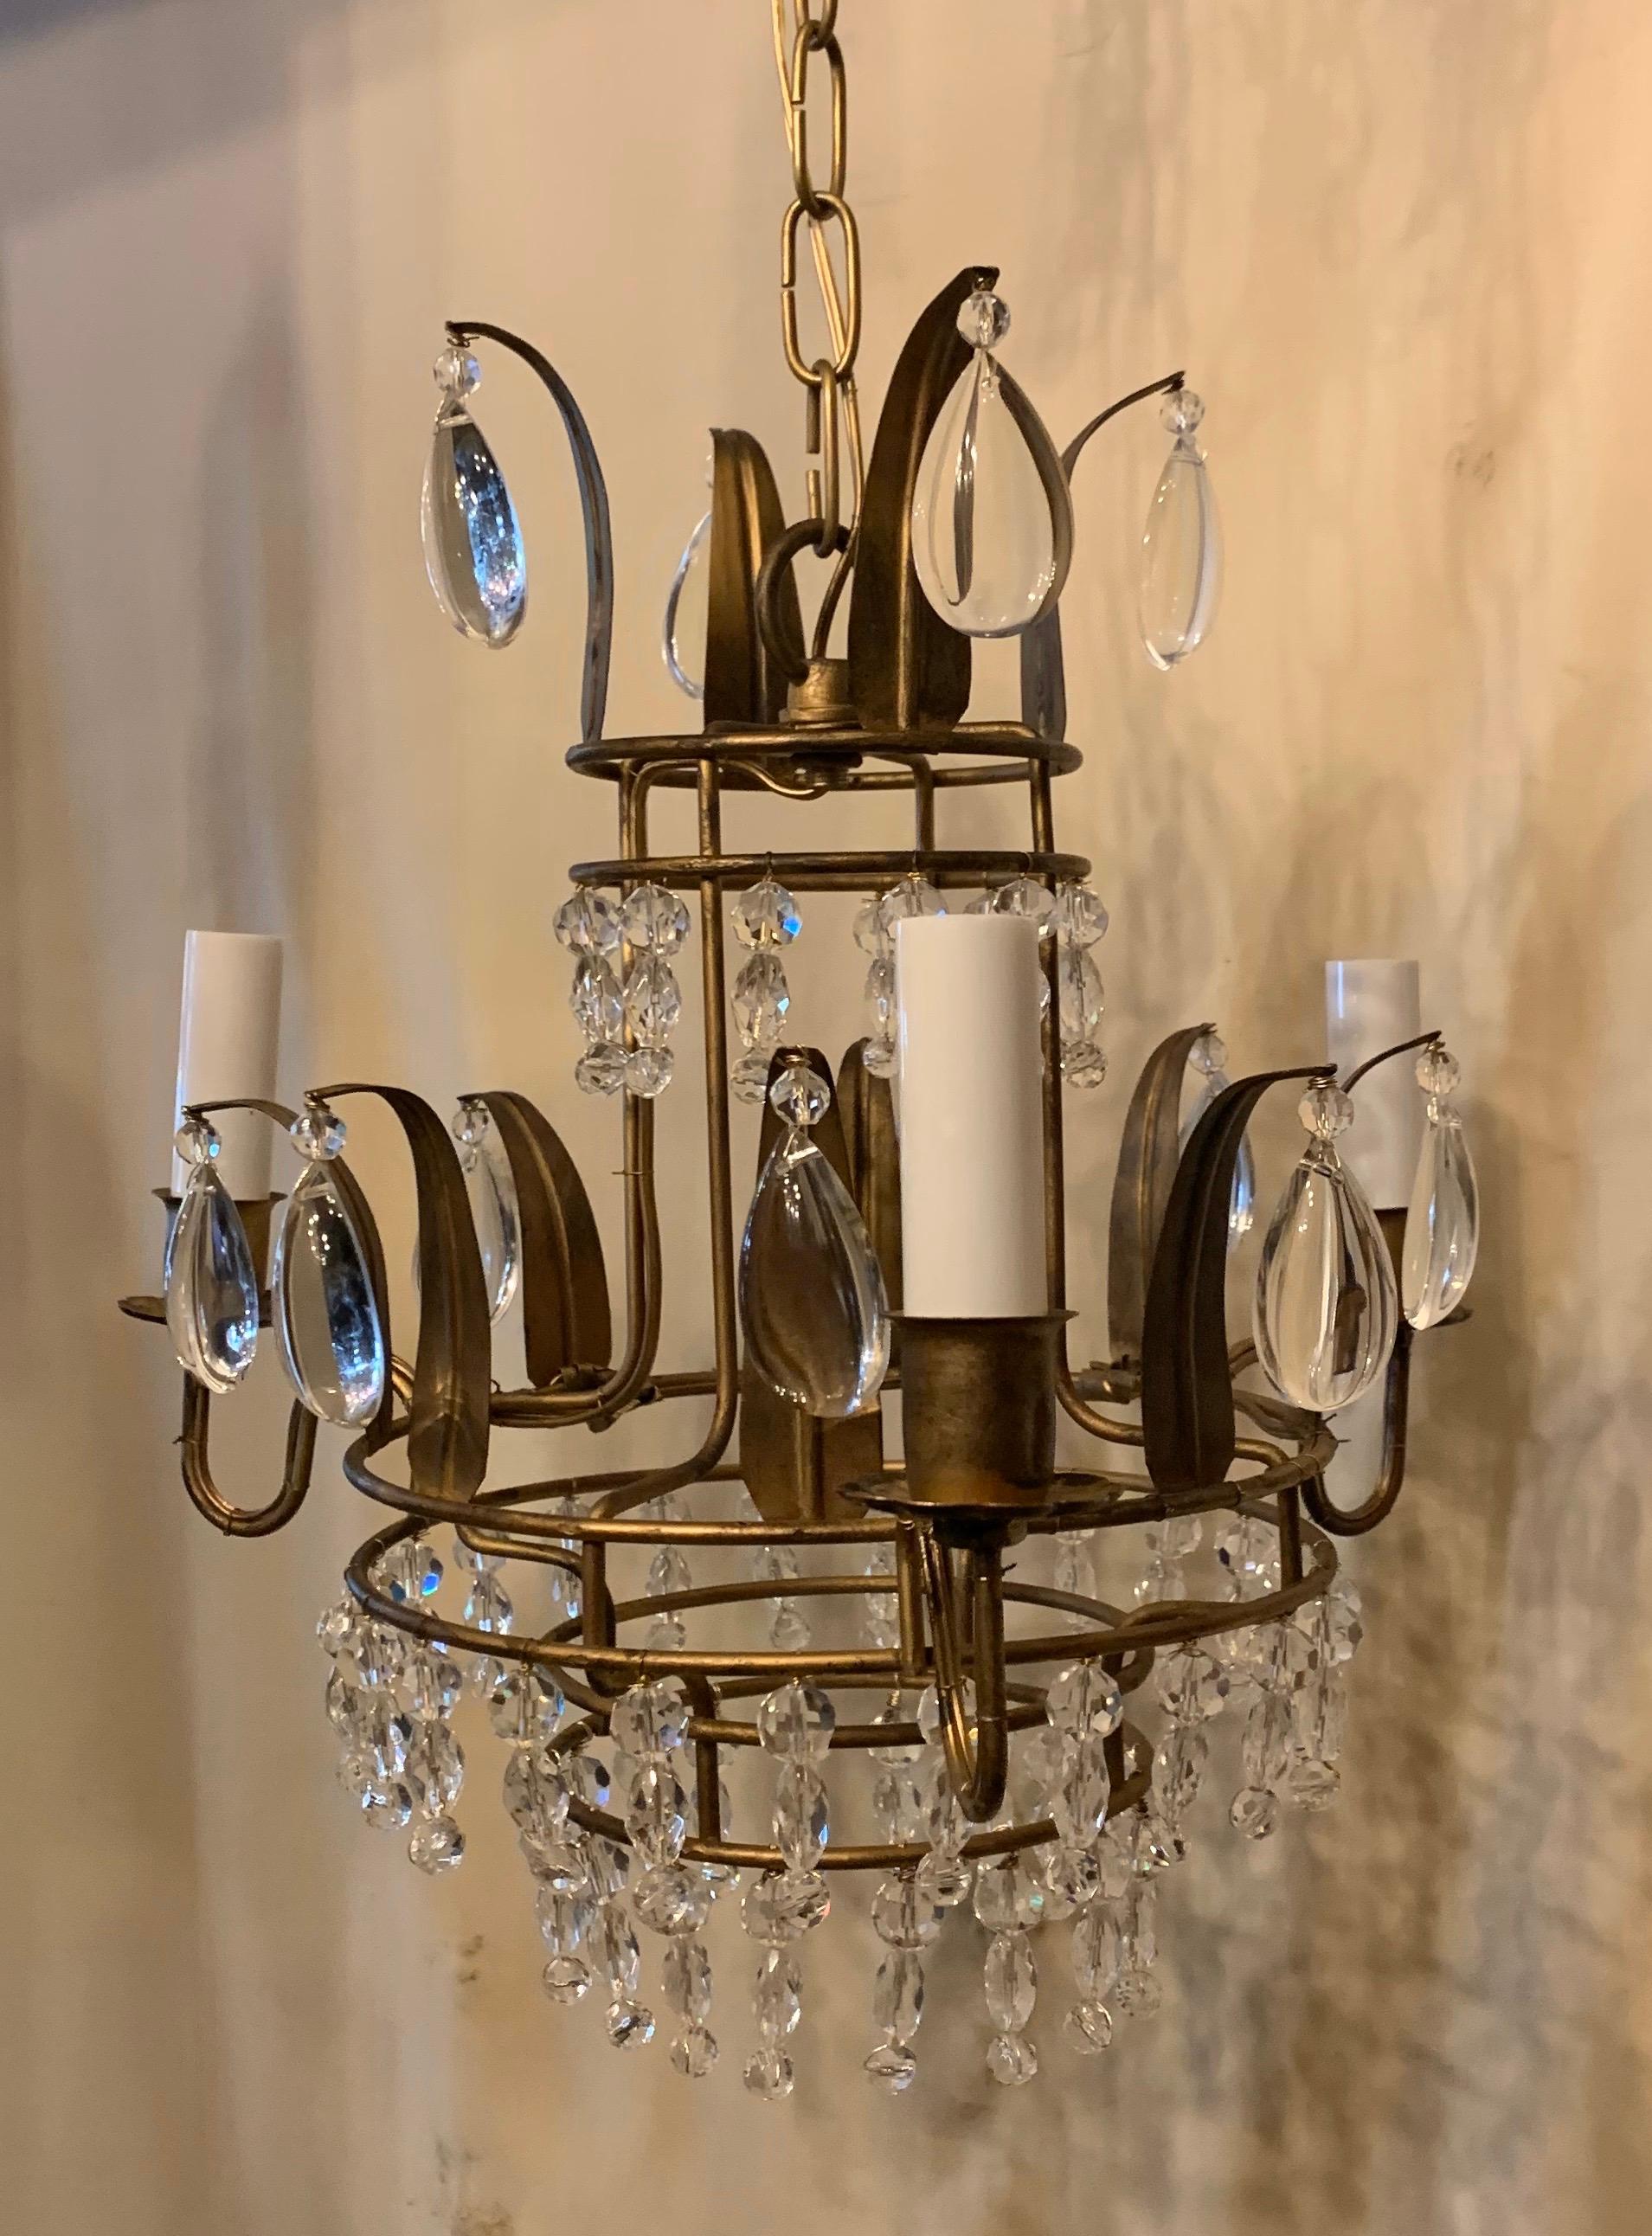 A wonderful gold gilt tole beaded crystal Baguès 3-light petite chandelier light fixture

Completely rewired with new sockets
Comes with chain canopy and mounting hardware.